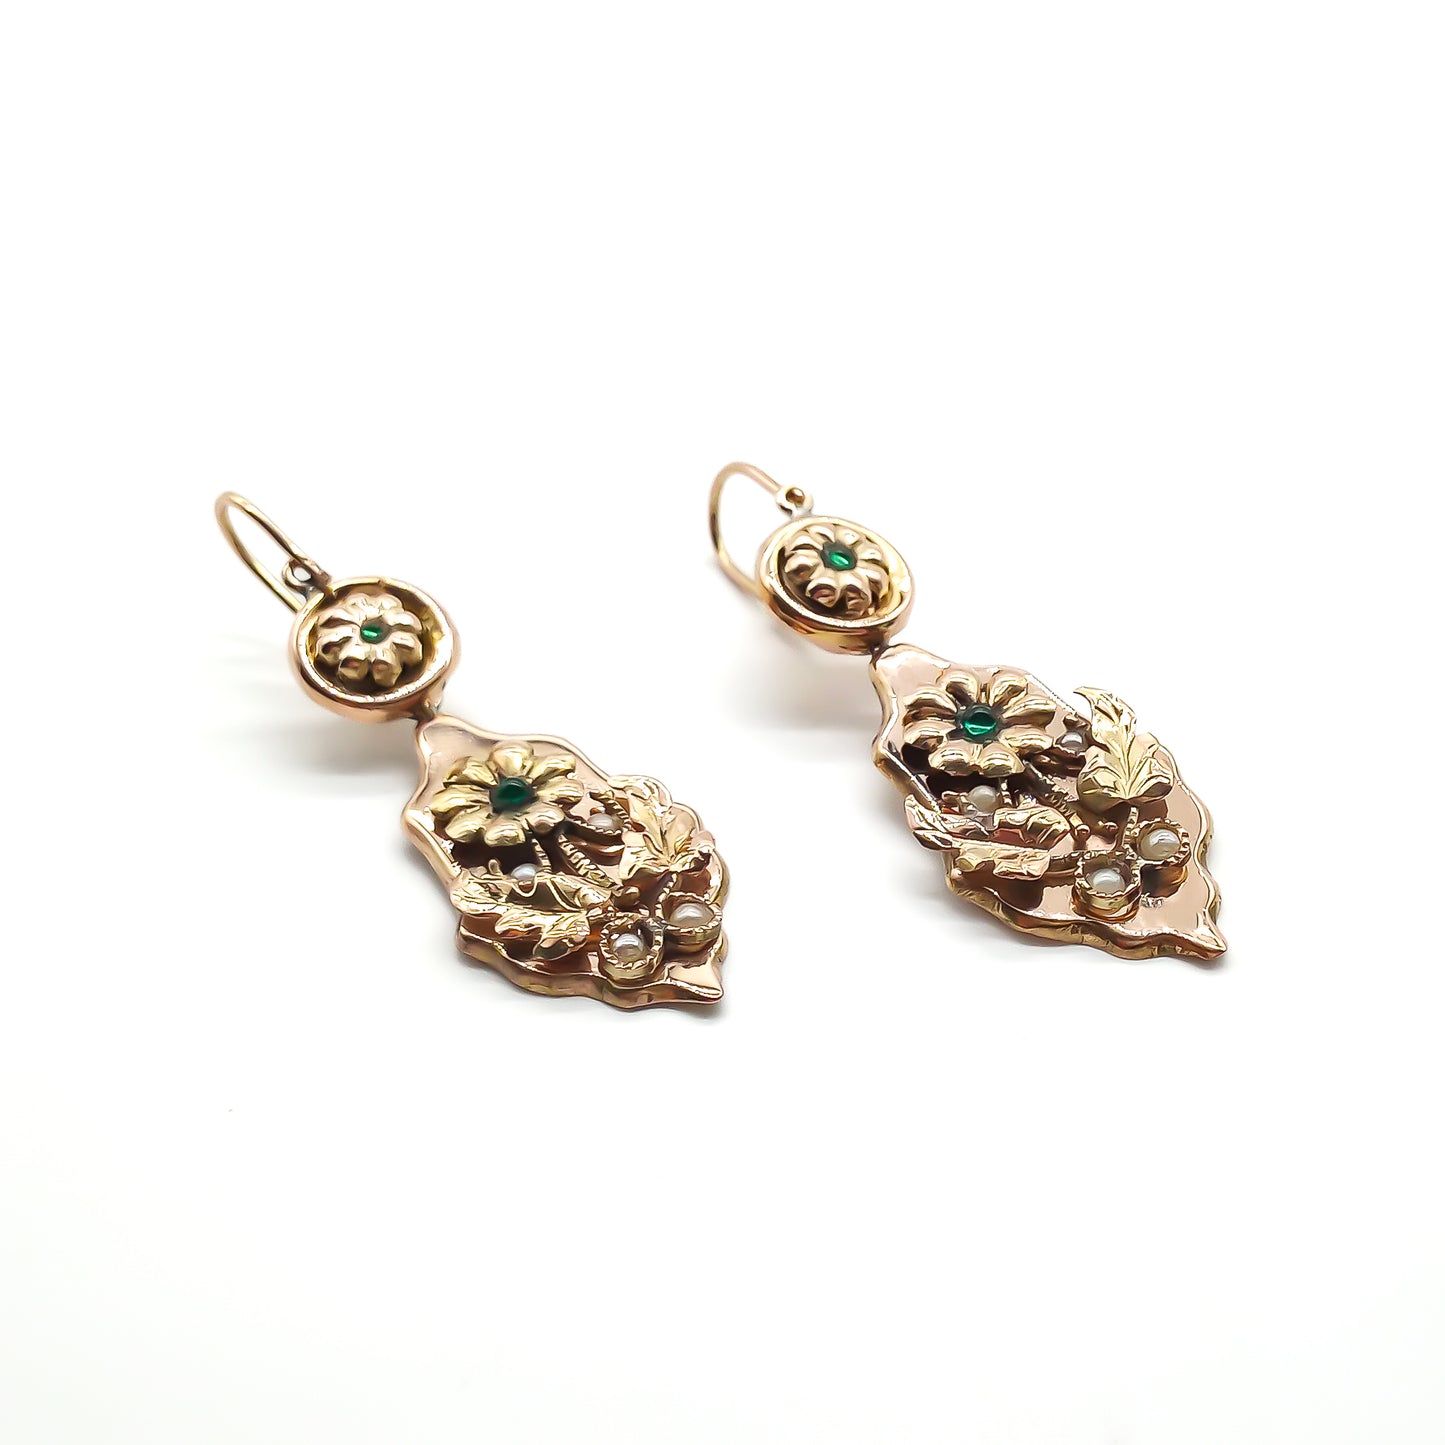 Stunning antique 18ct rose gold drop earrings, each set with two cabochon emeralds and four seed pearls in a floral design. Italy